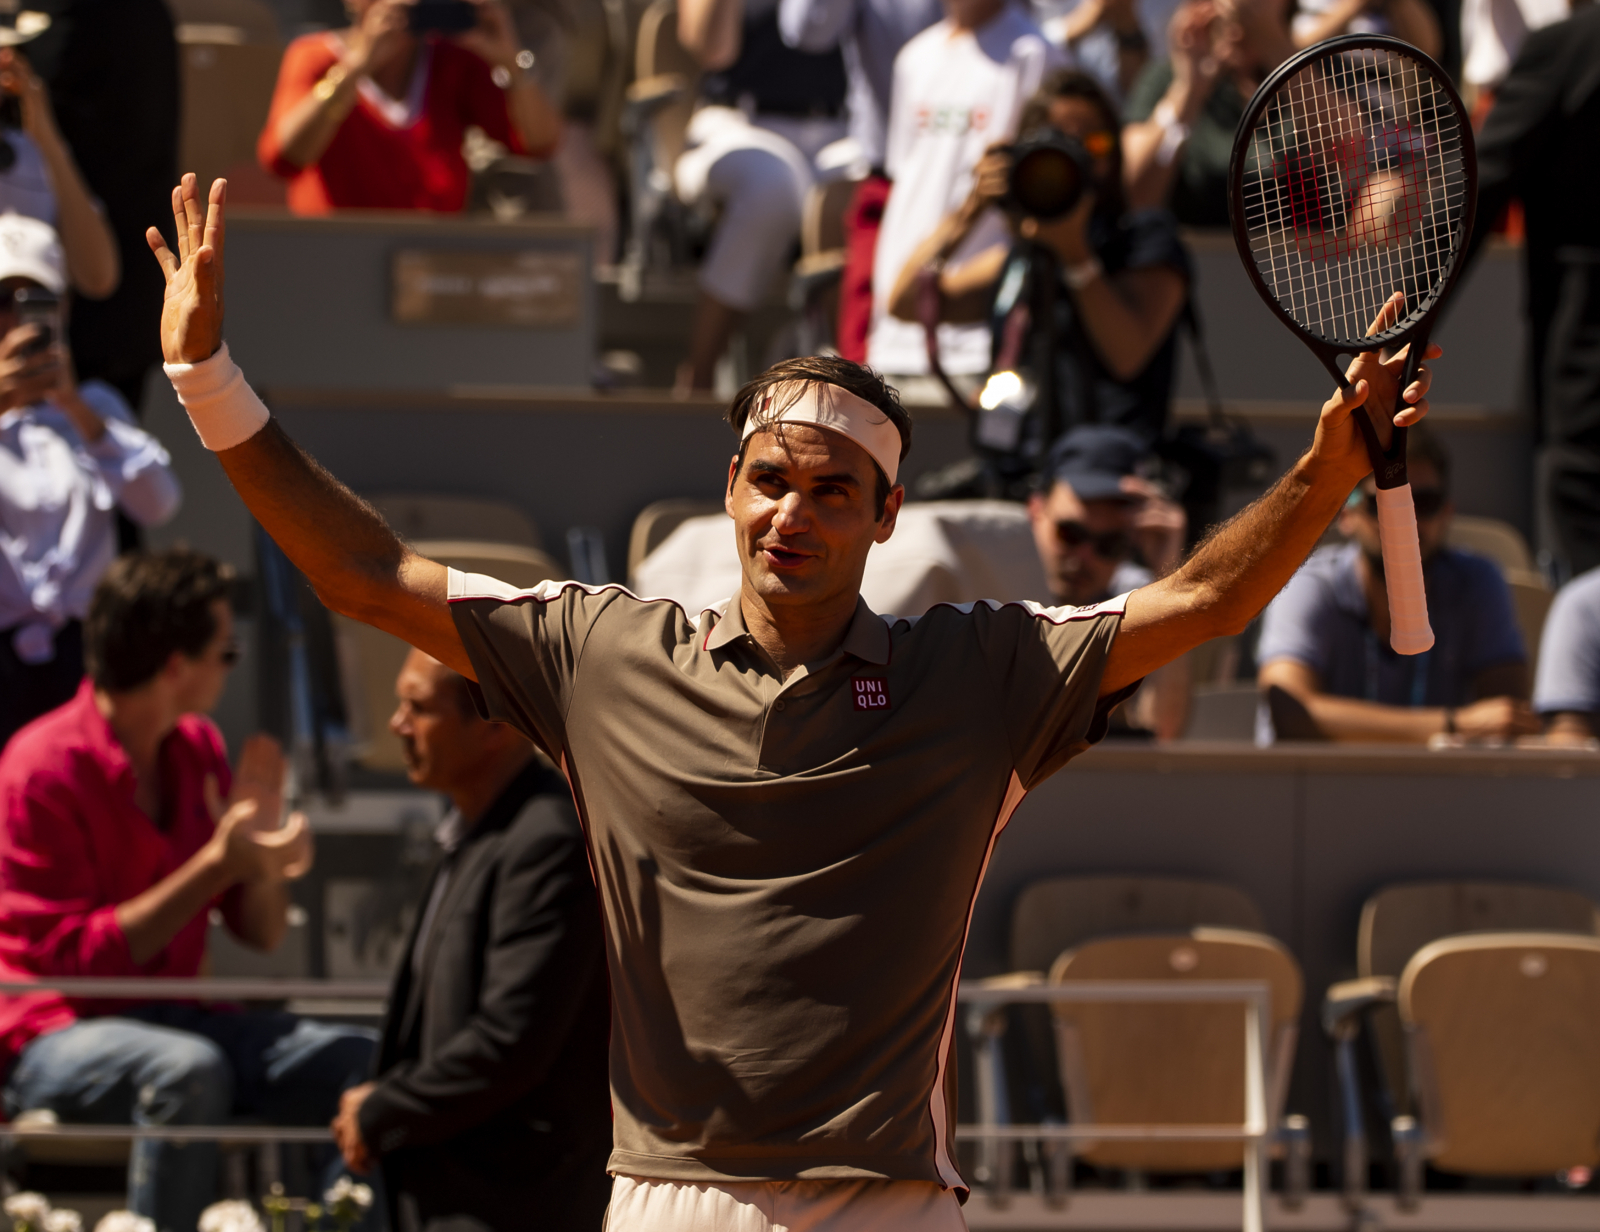 French Open Tennis 2019 How to Watch Nadal and Federer Quarter-final Matches, Schedule, Live Stream